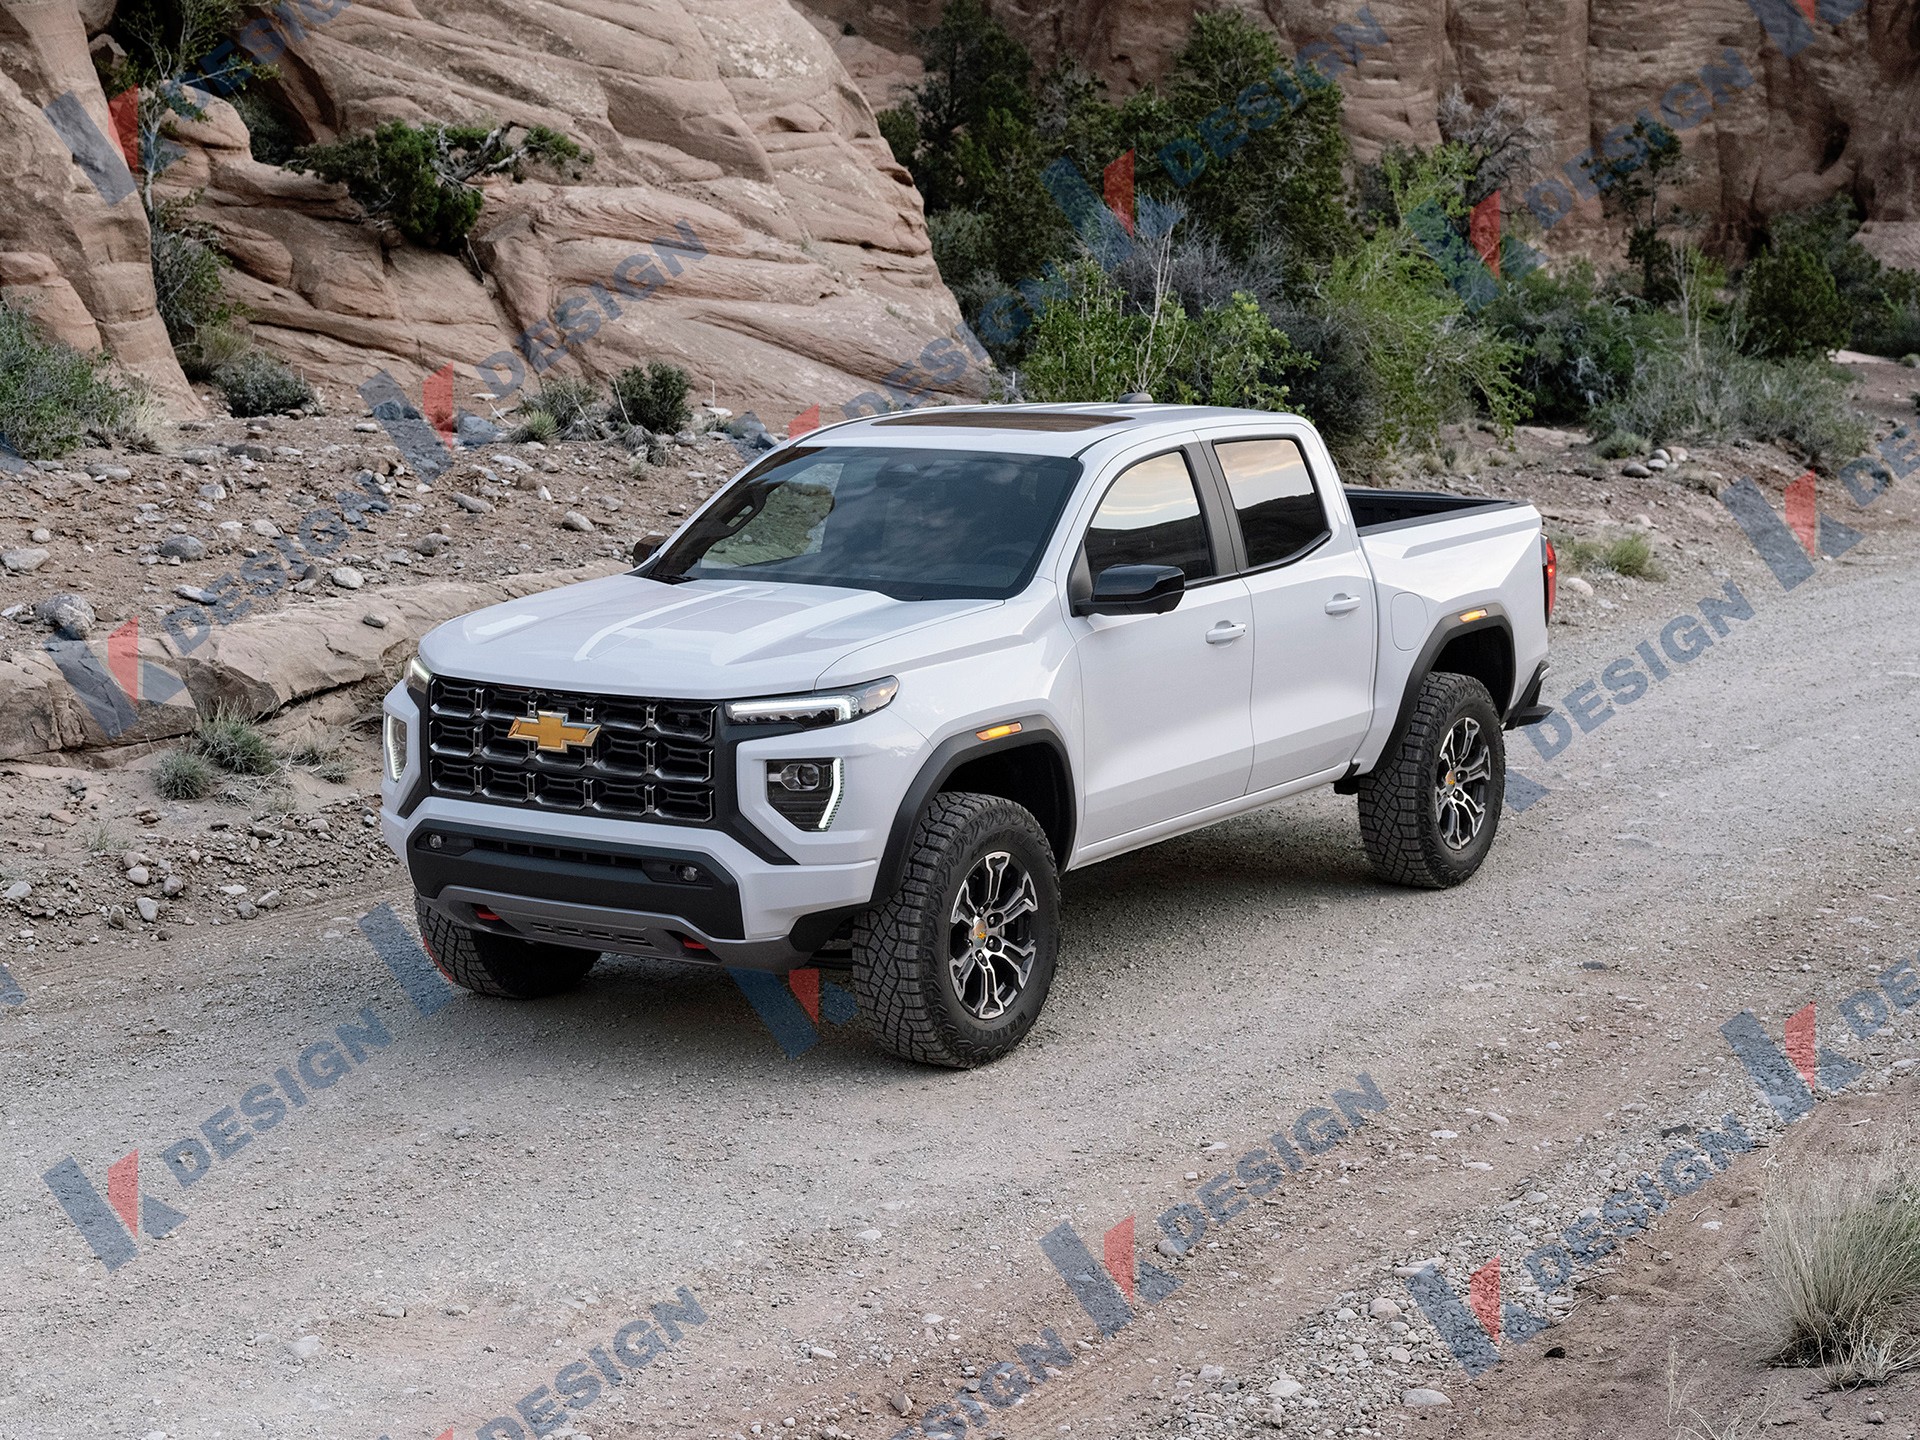 south american chevy s 10 informally takes after gmc canyon rather than colorado 4